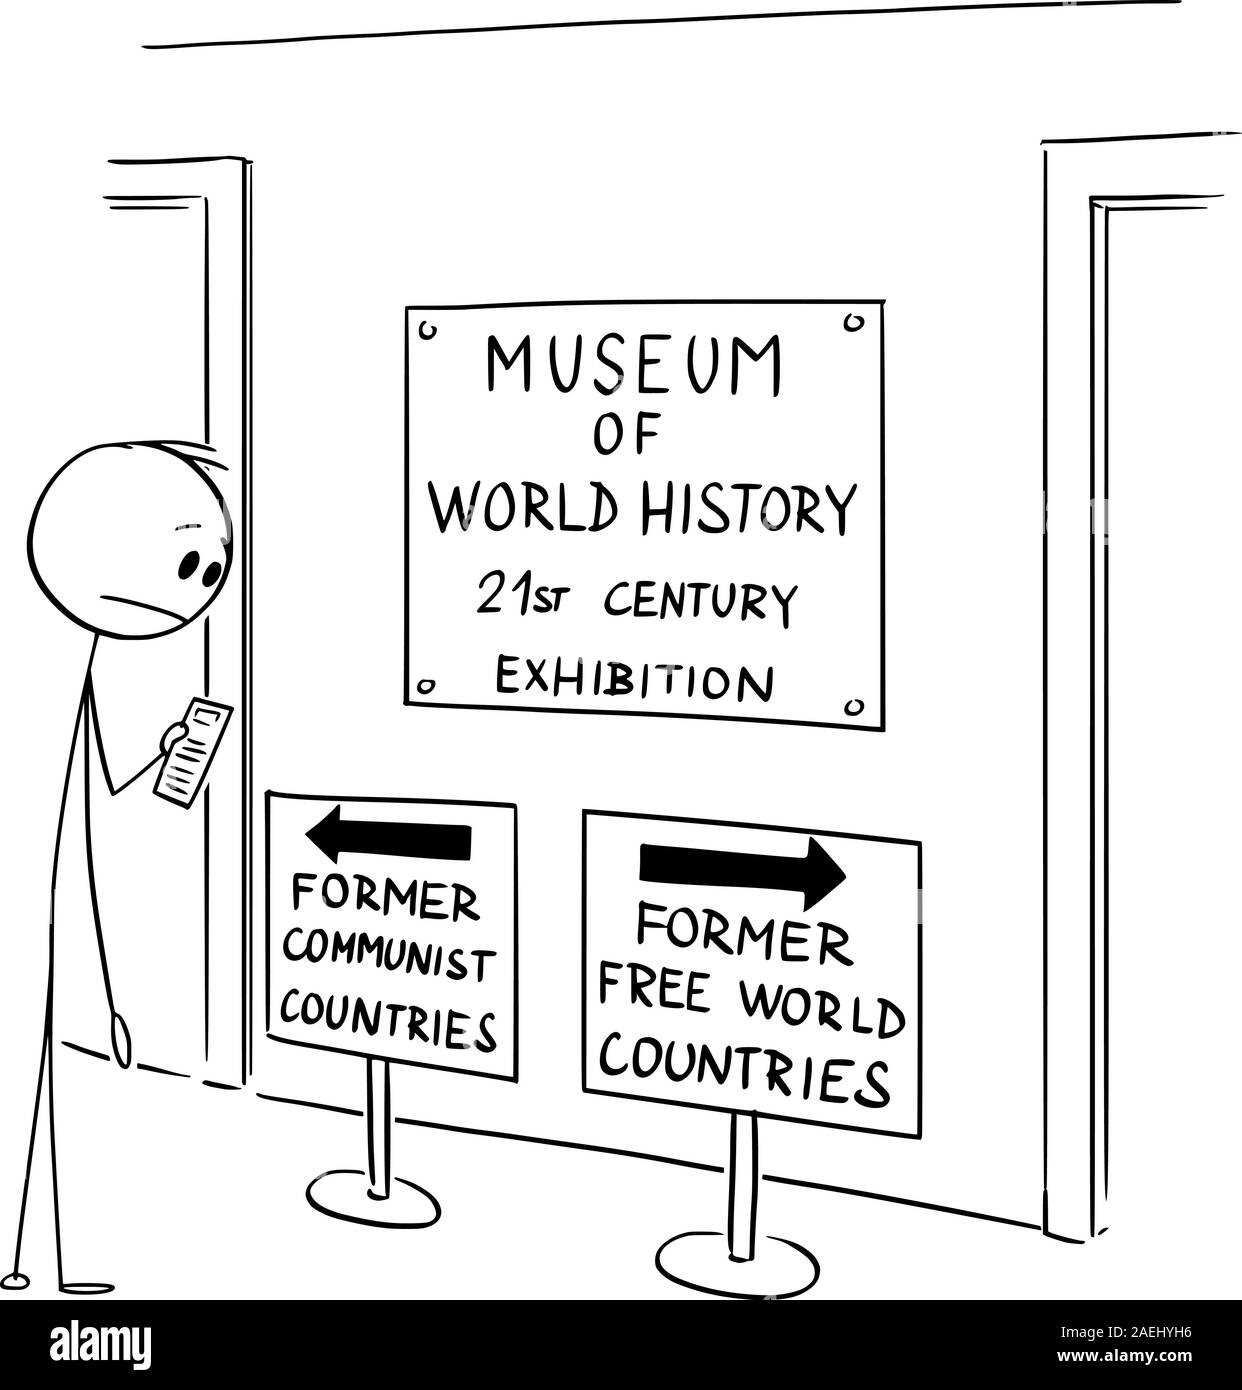 Vector cartoon stick figure drawing conceptual illustration of man in museum looking at ambiguous text on sign indicating the loss of freedom and liberty in western countries, also known as free world. Stock Vector